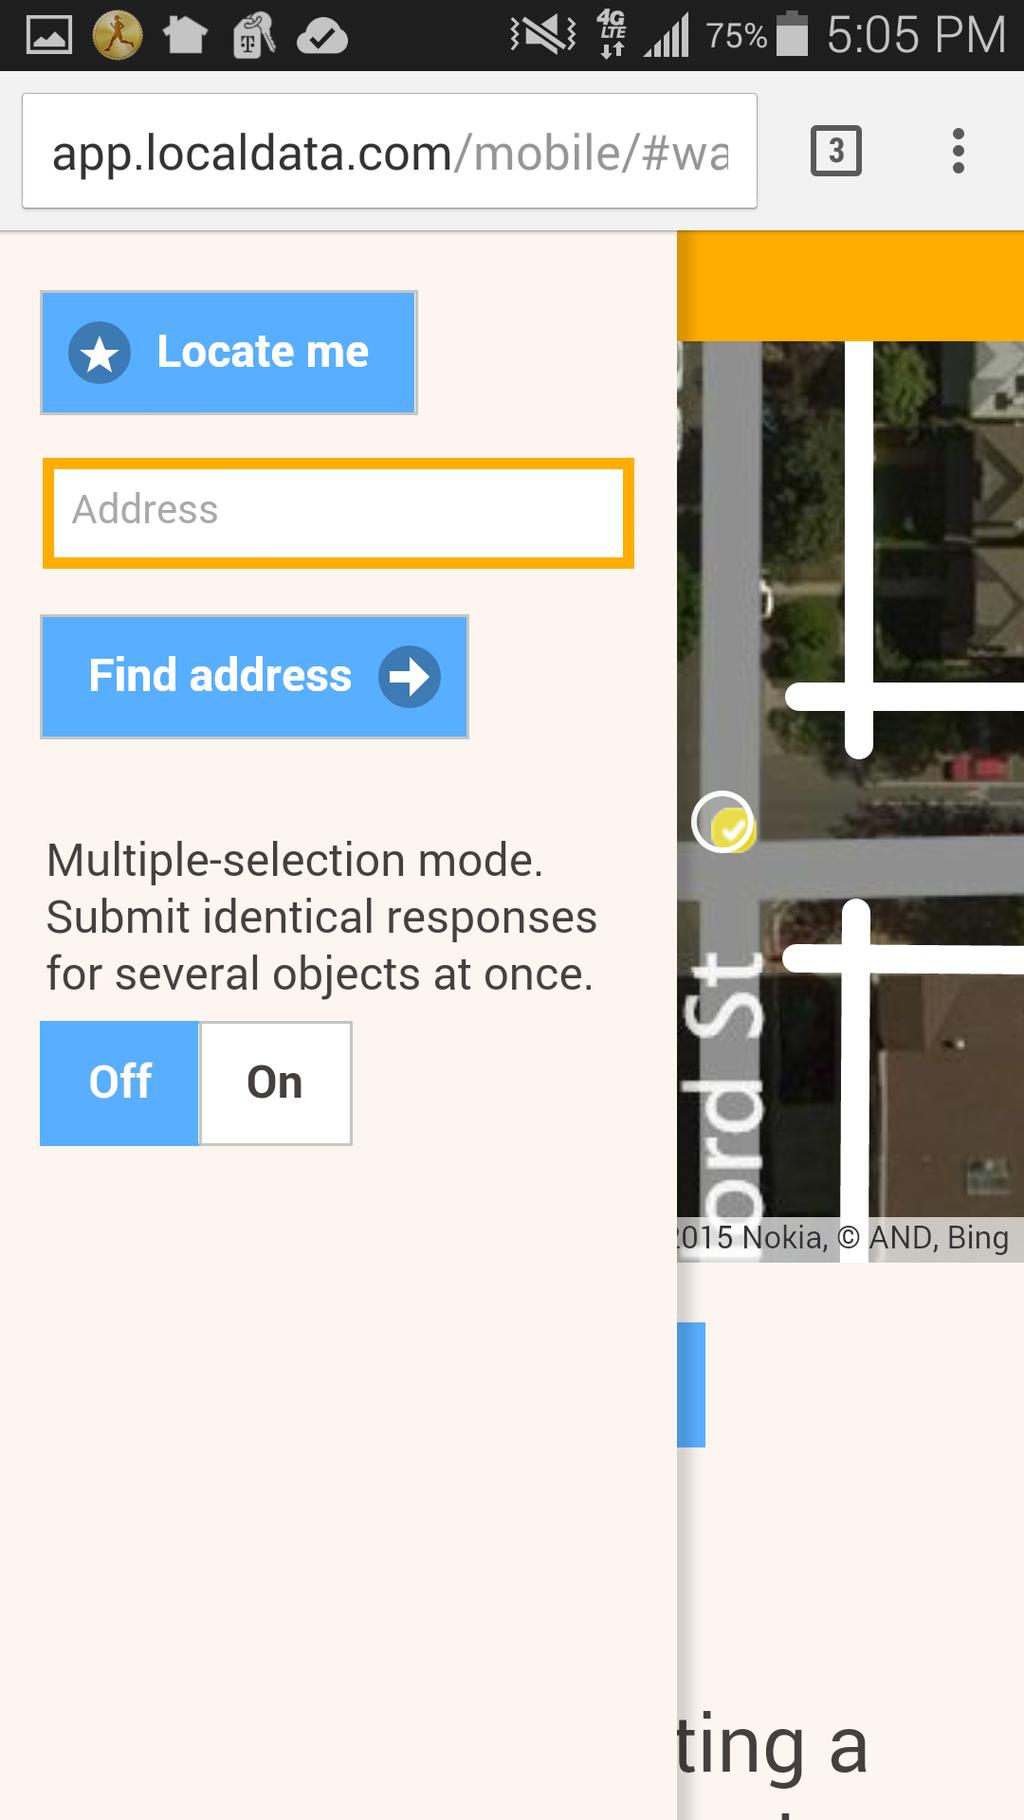 Click on the blue Locate me button to move the map to your current location. Location services must be enabled on both your device AND your browser for this to work. b. Alternatively, enter an address in the orange box and click on the blue Find address button.